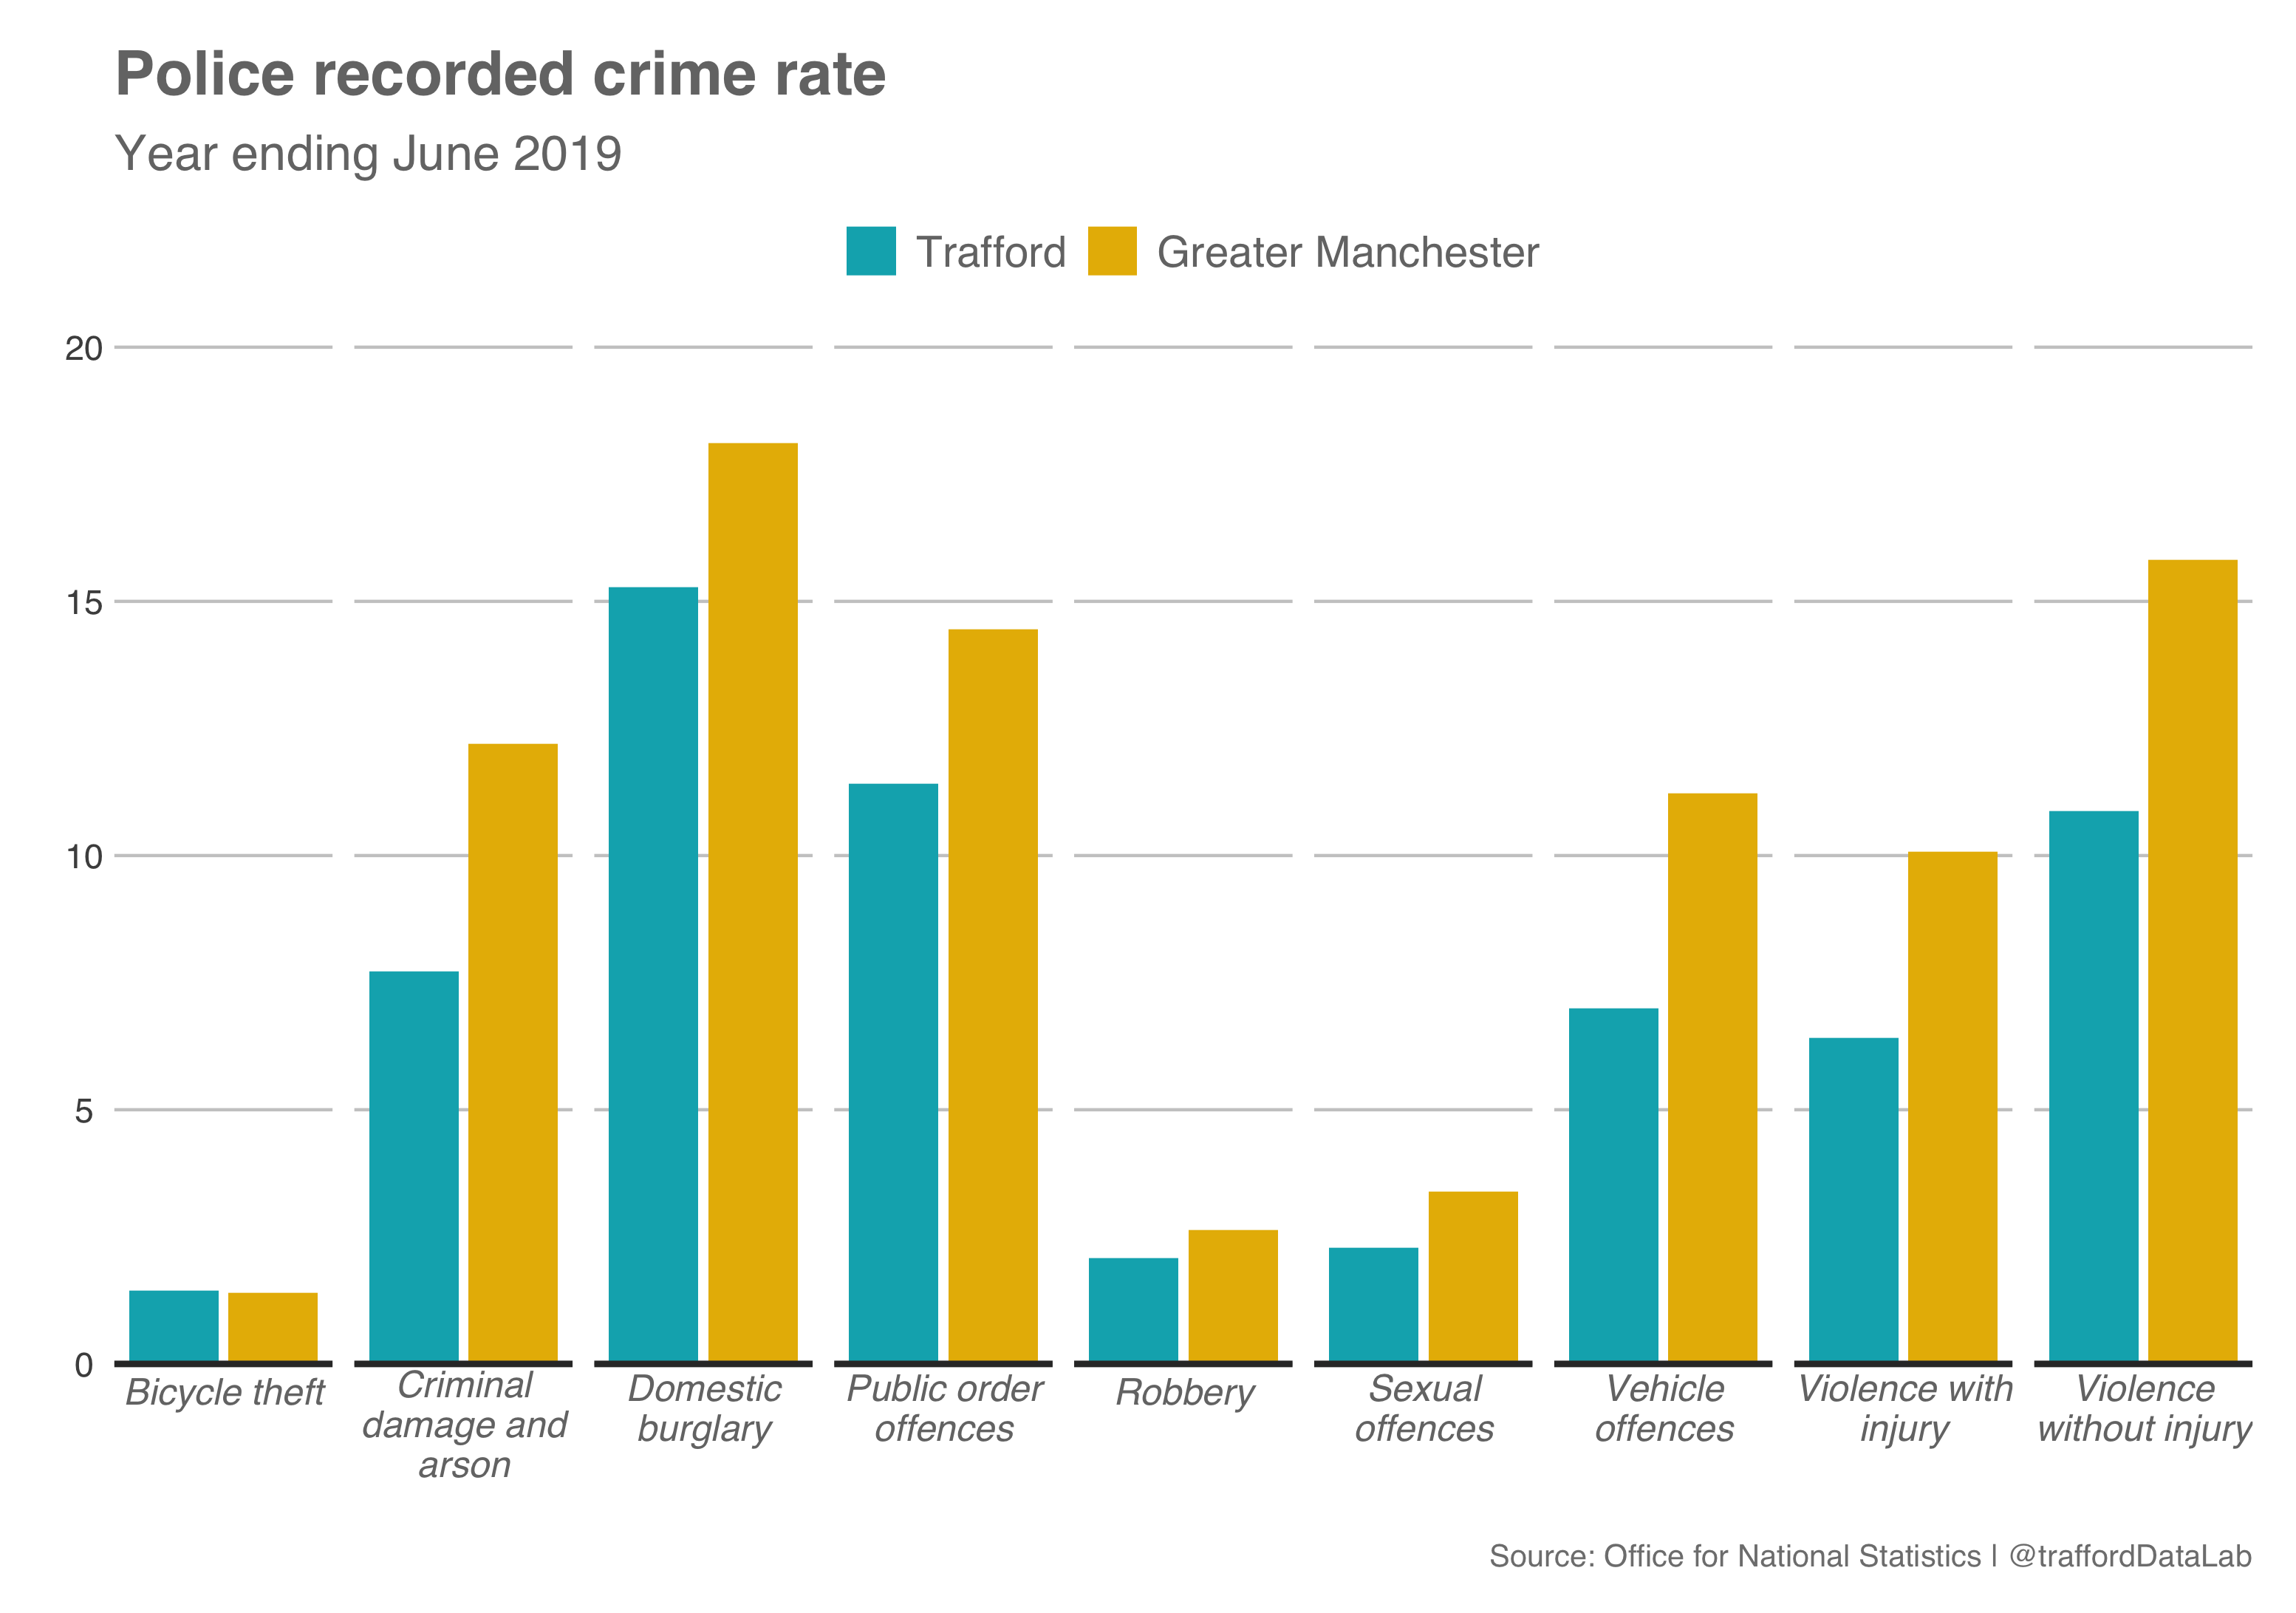 Recorded crime rate by category in Trafford compared to Greater Manchester, year ending June 2019.